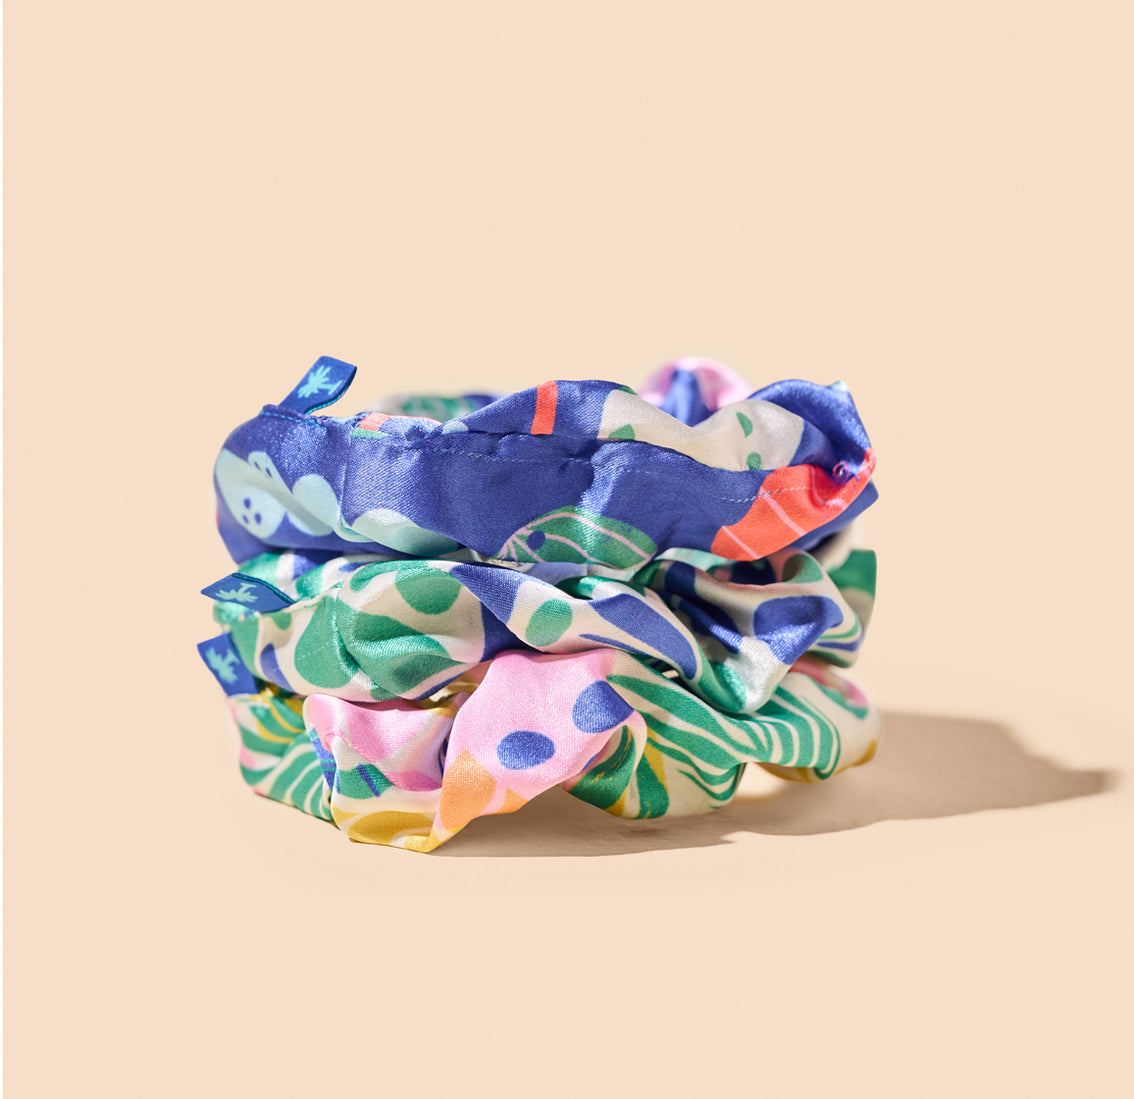 A vibrant Vita Coco scrunchie with a tropical pattern, perfect for adding a pop of color to your hair.